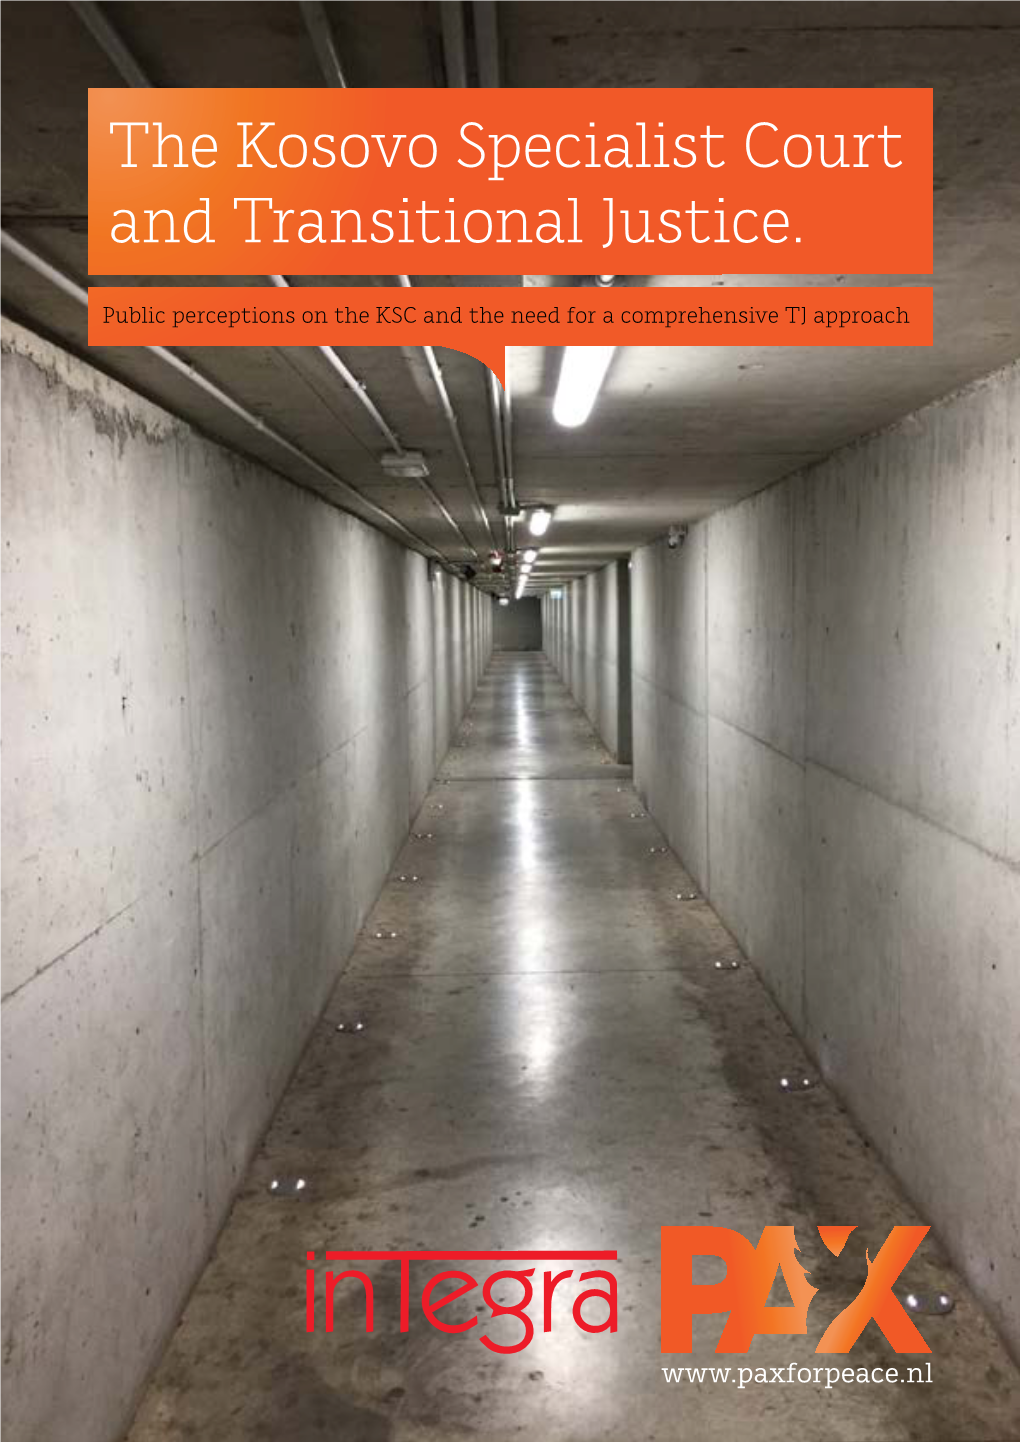 The Kosovo Specialist Court and Transitional Justice